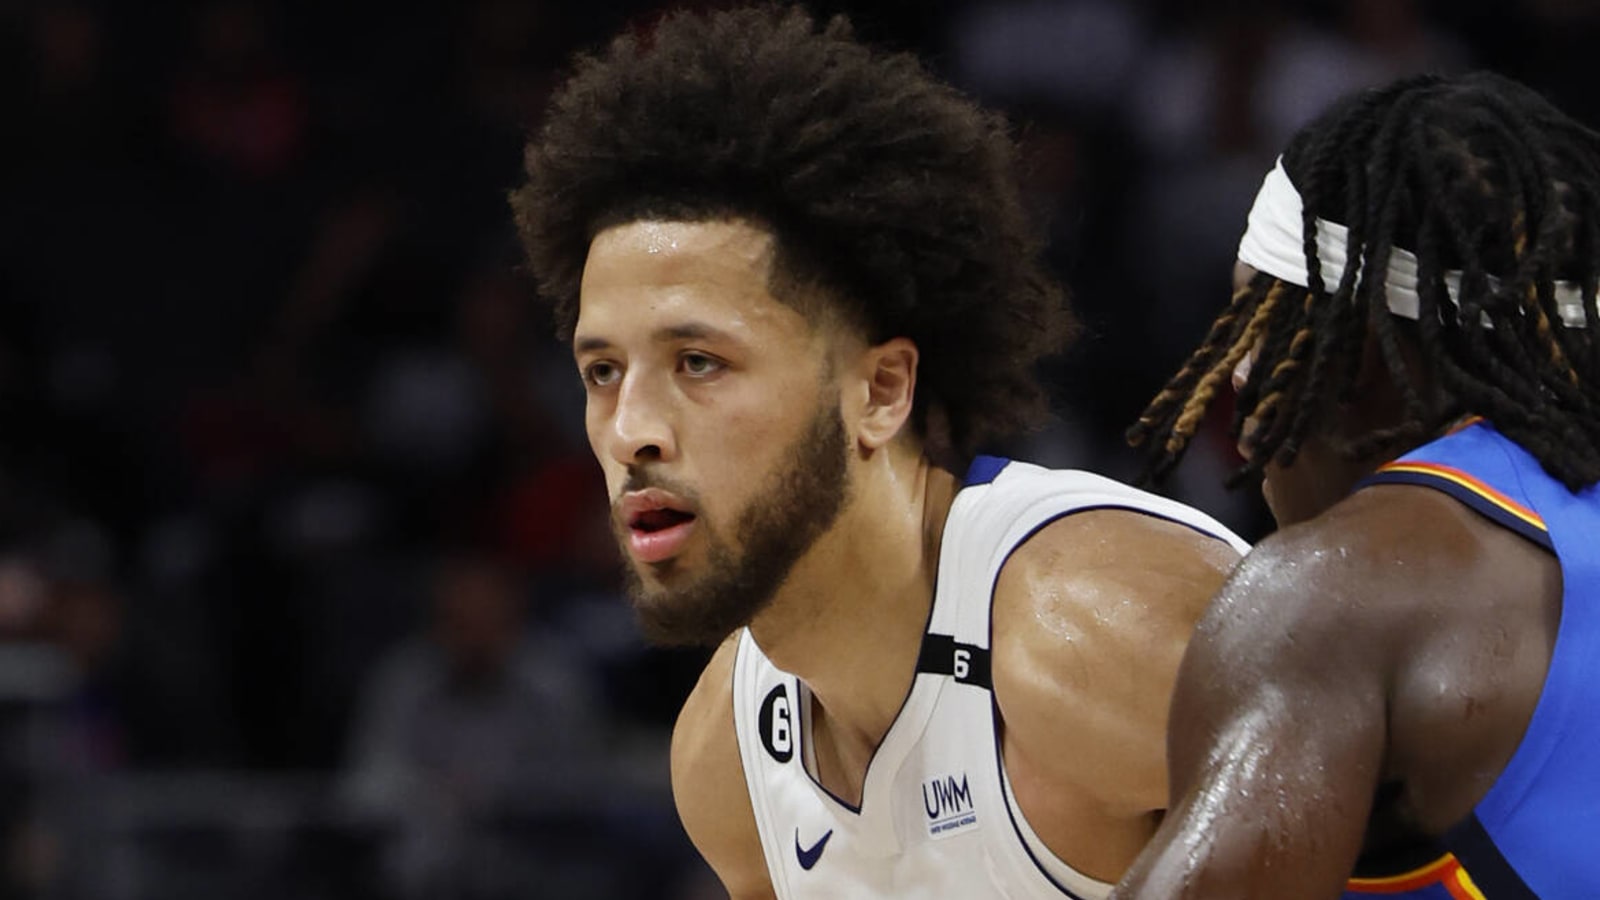 Cade Cunningham 'ready to keep moving forward' after mediocre preseason